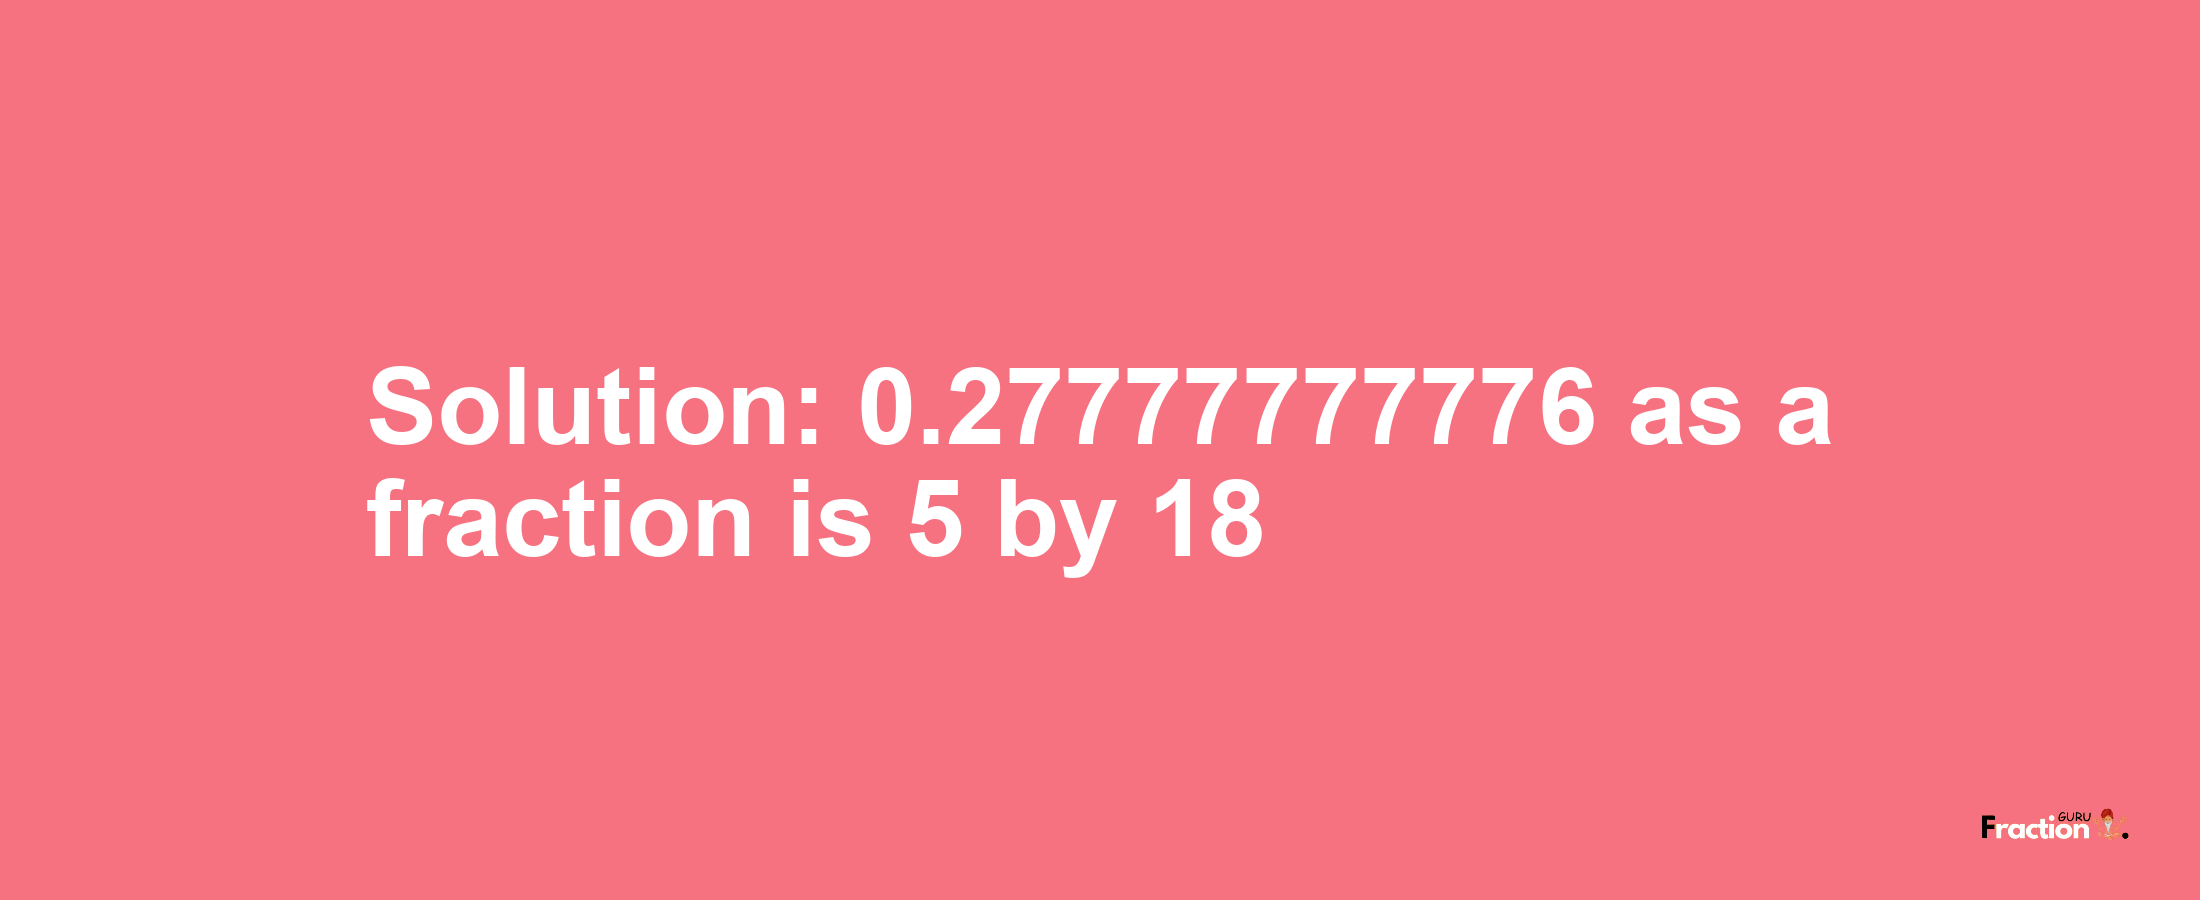 Solution:0.27777777776 as a fraction is 5/18